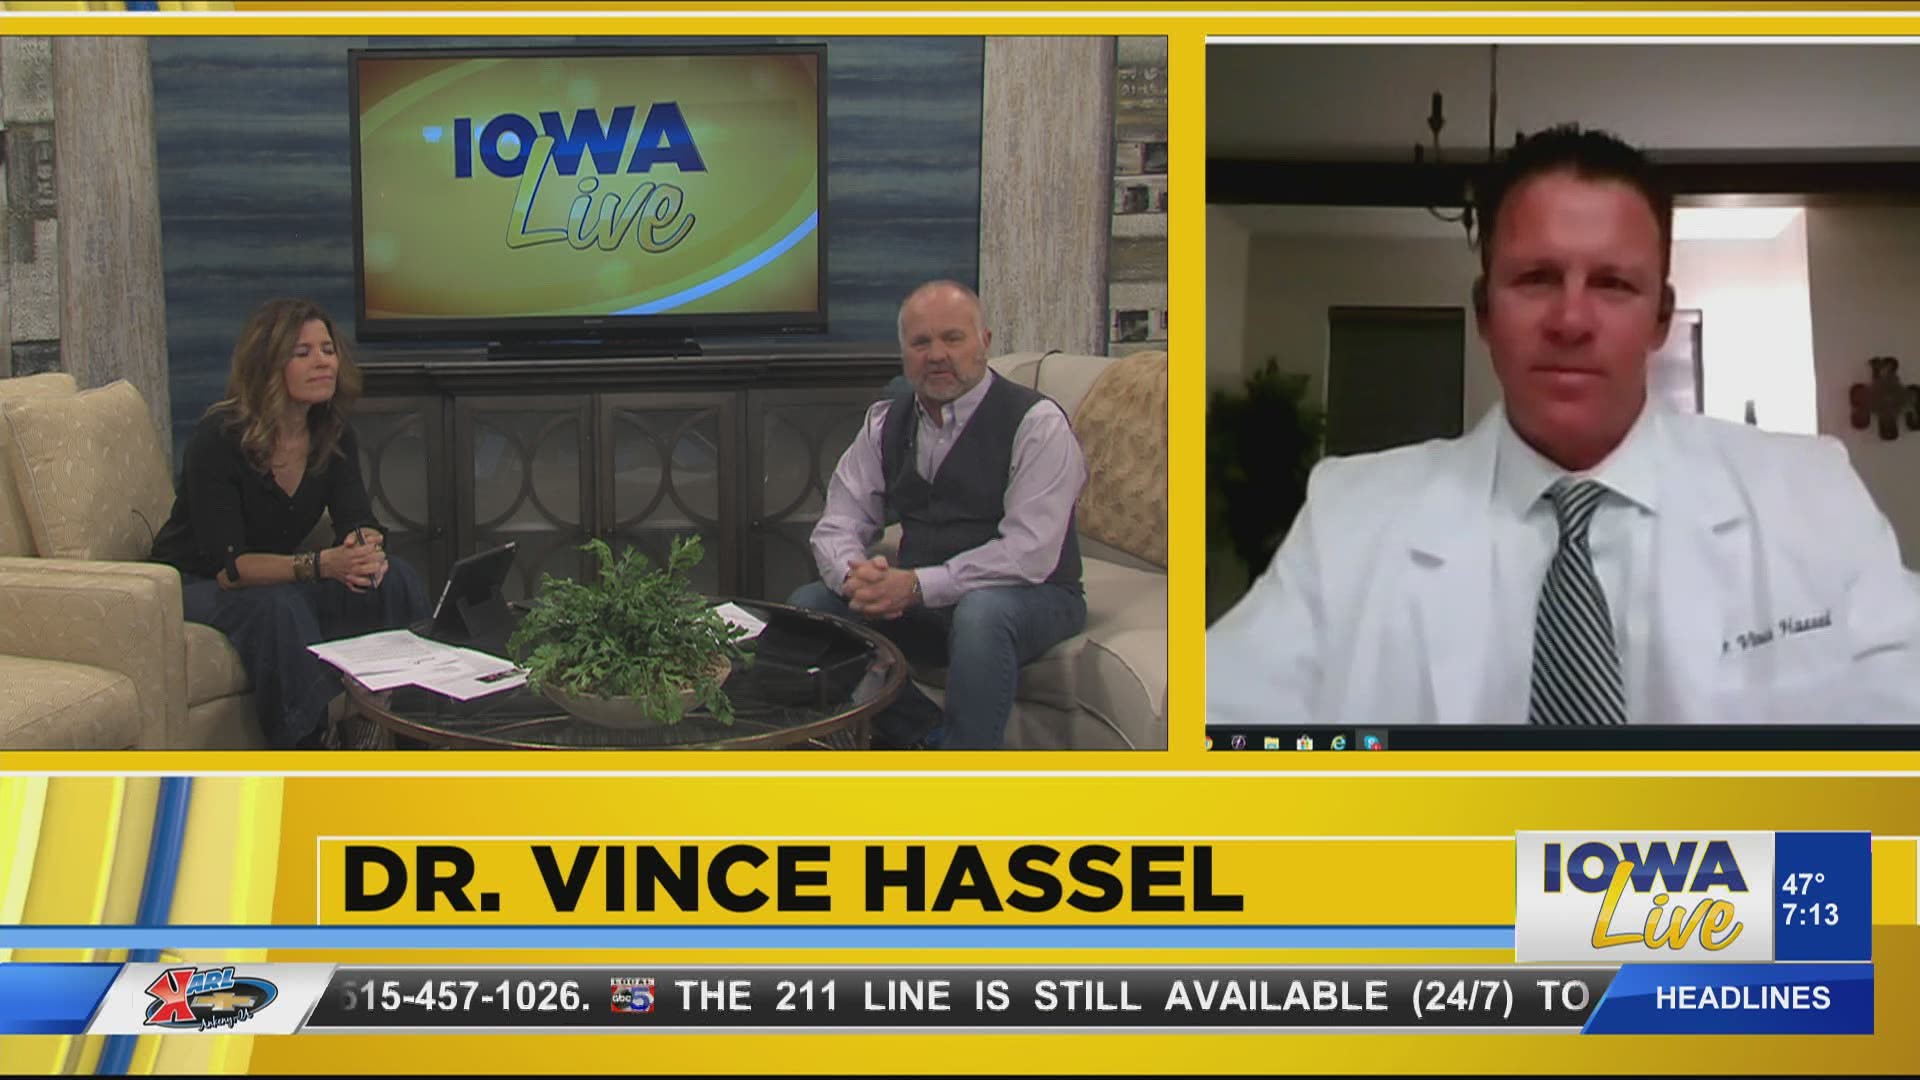 Dr. Vince Hassel skypes in to talk to Lou and Michele